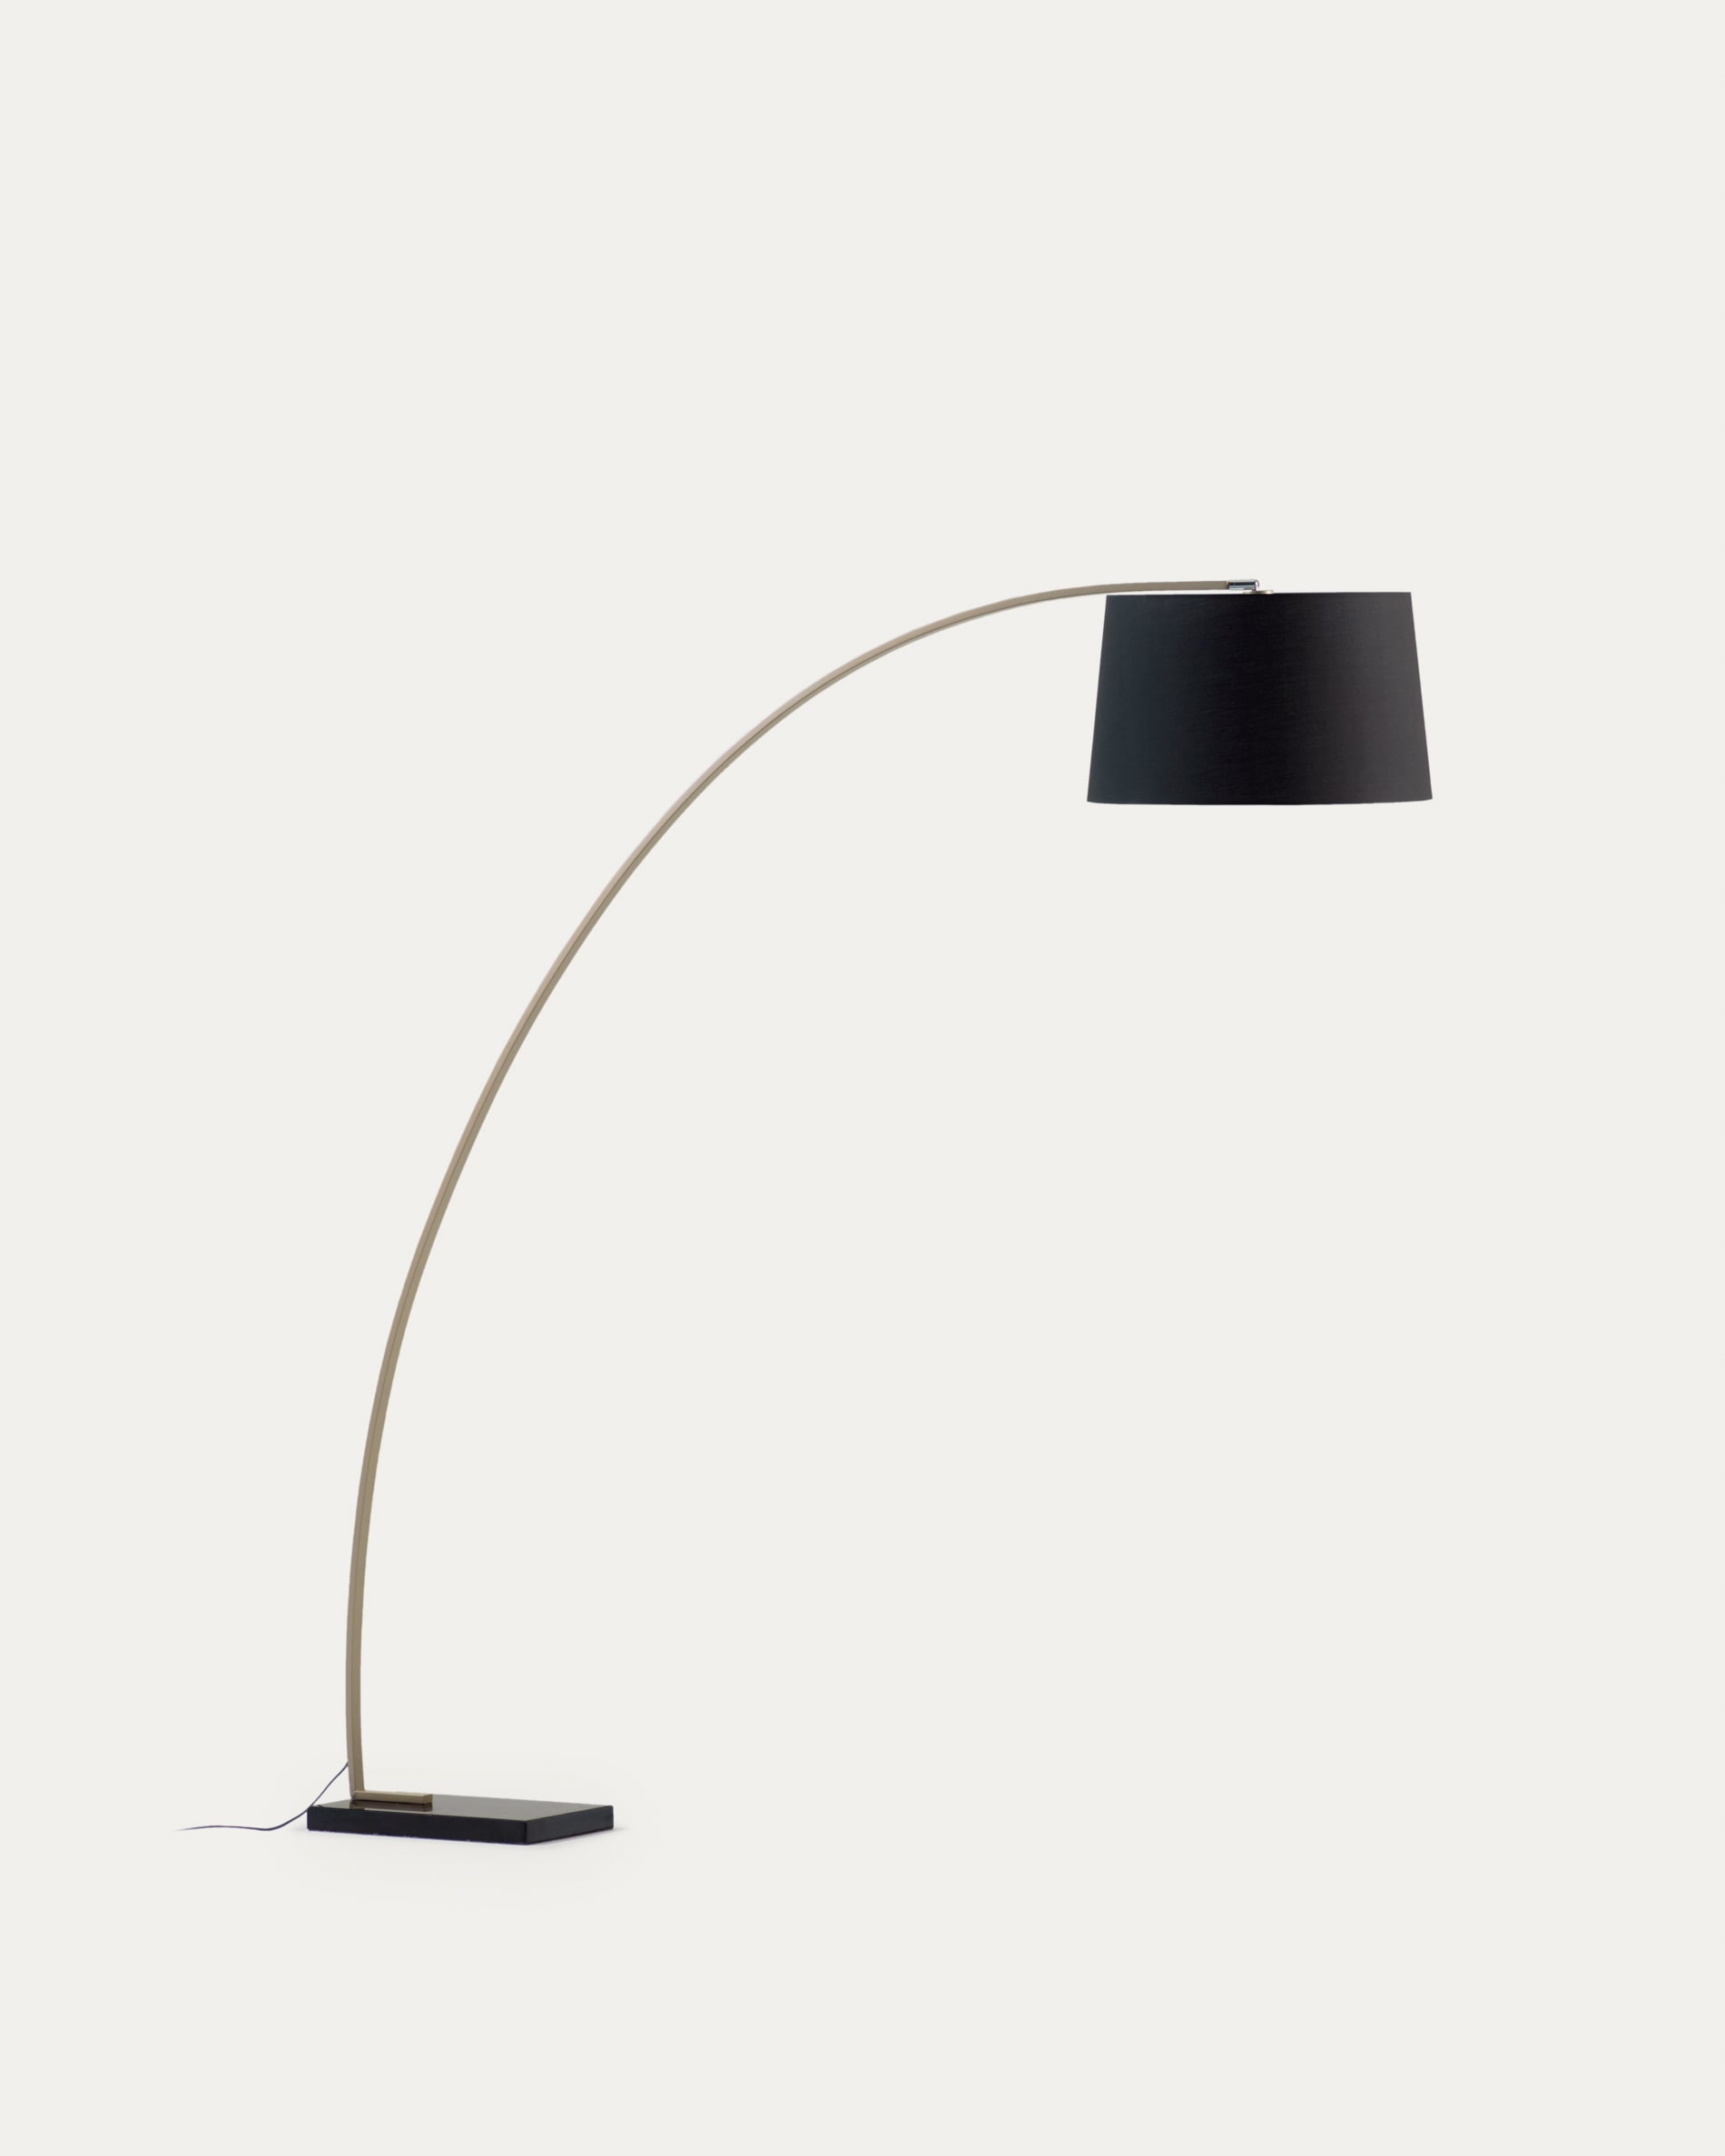 Table lamp Gold/Brass with 25cm Black Shade - Parte